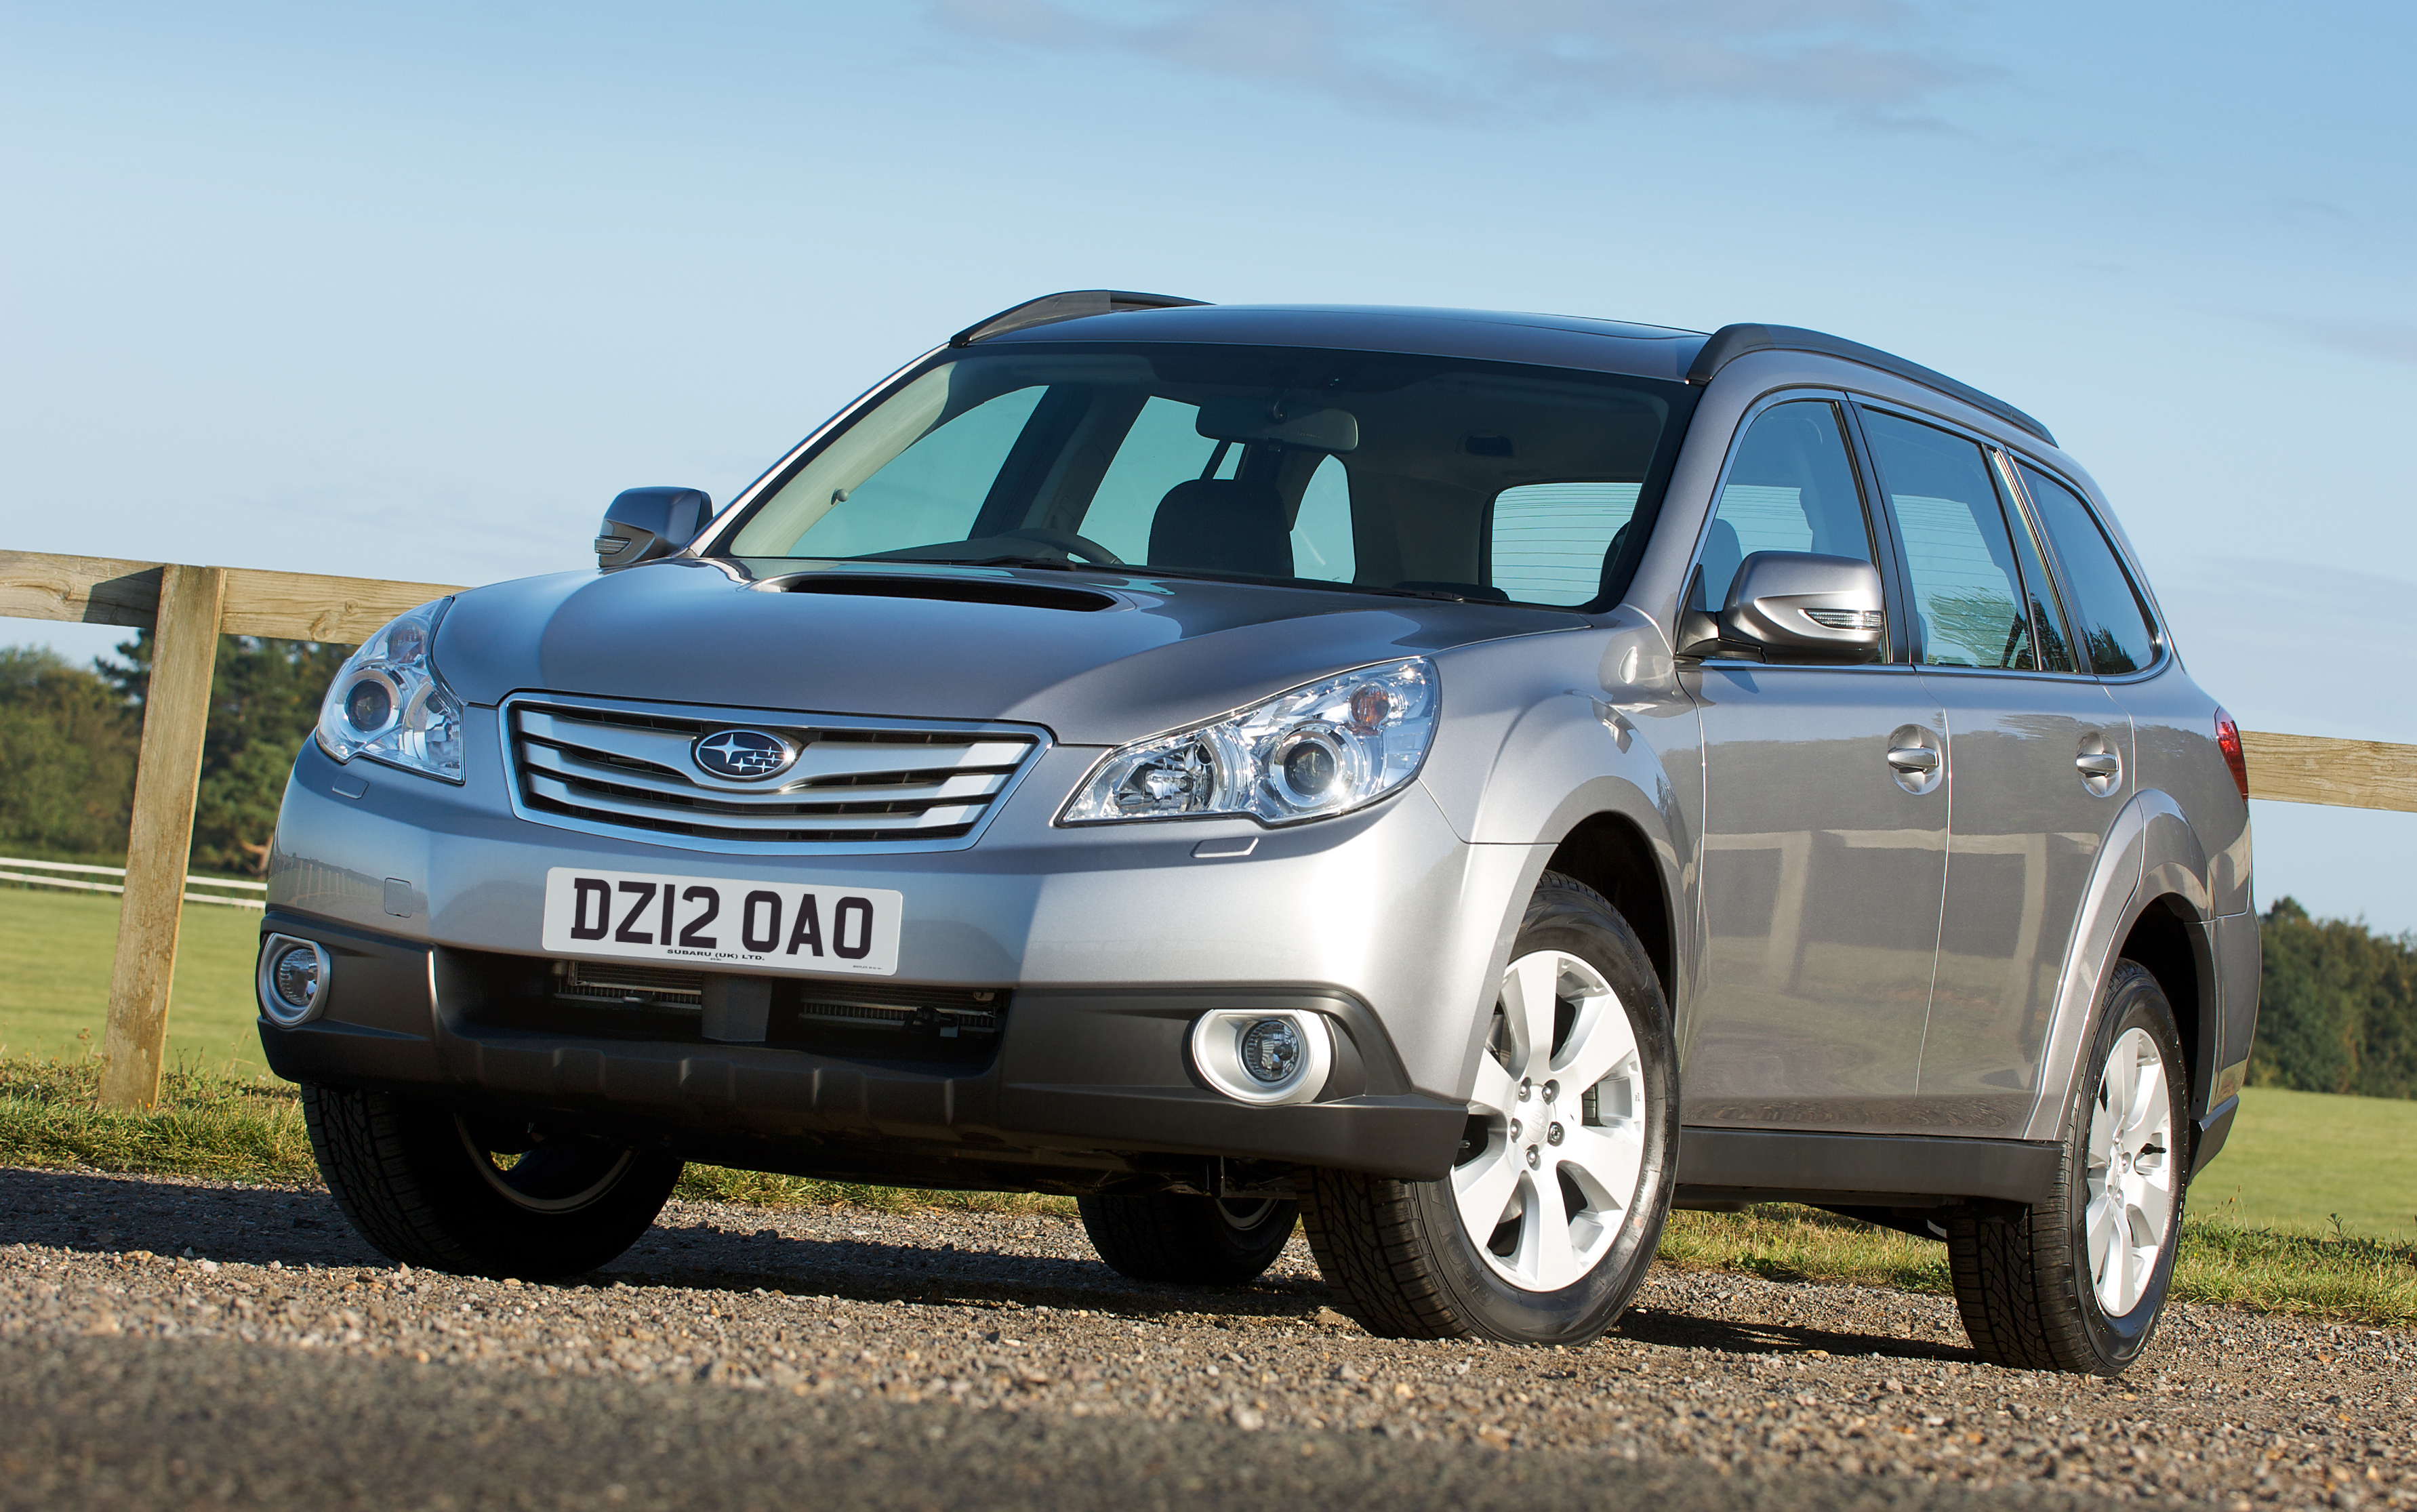 Subaru's Outback is rugged and dependable